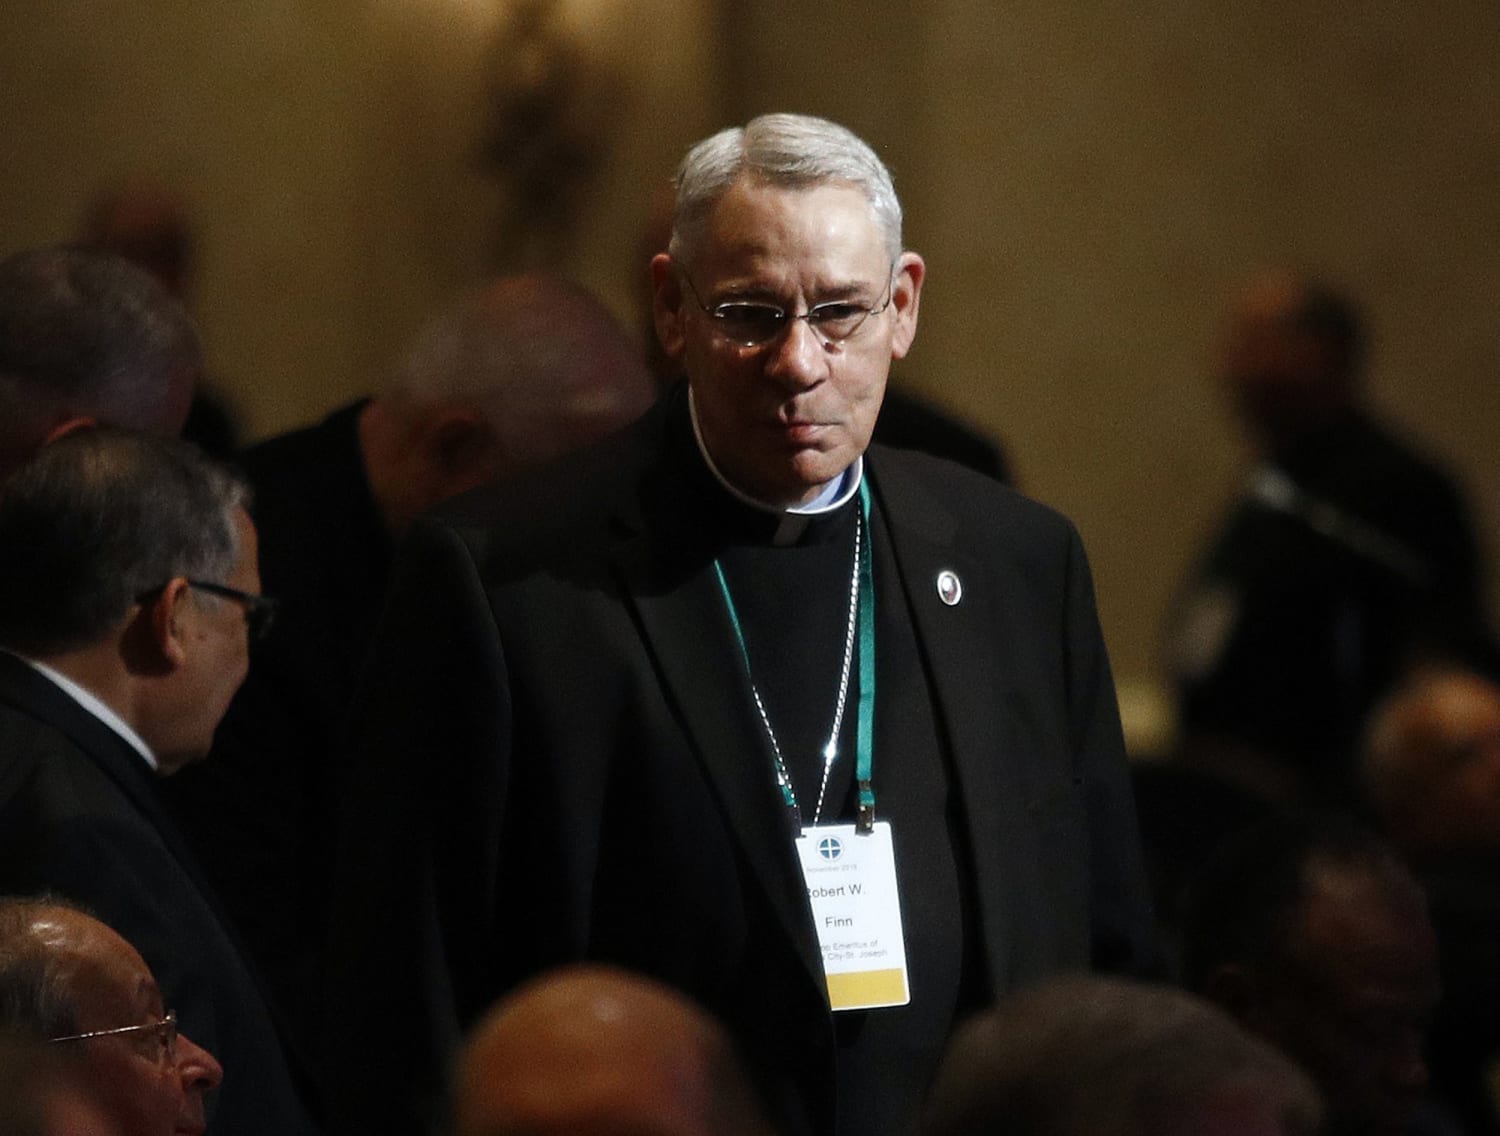 Bishops meeting on sex abuse clouded by state investigations